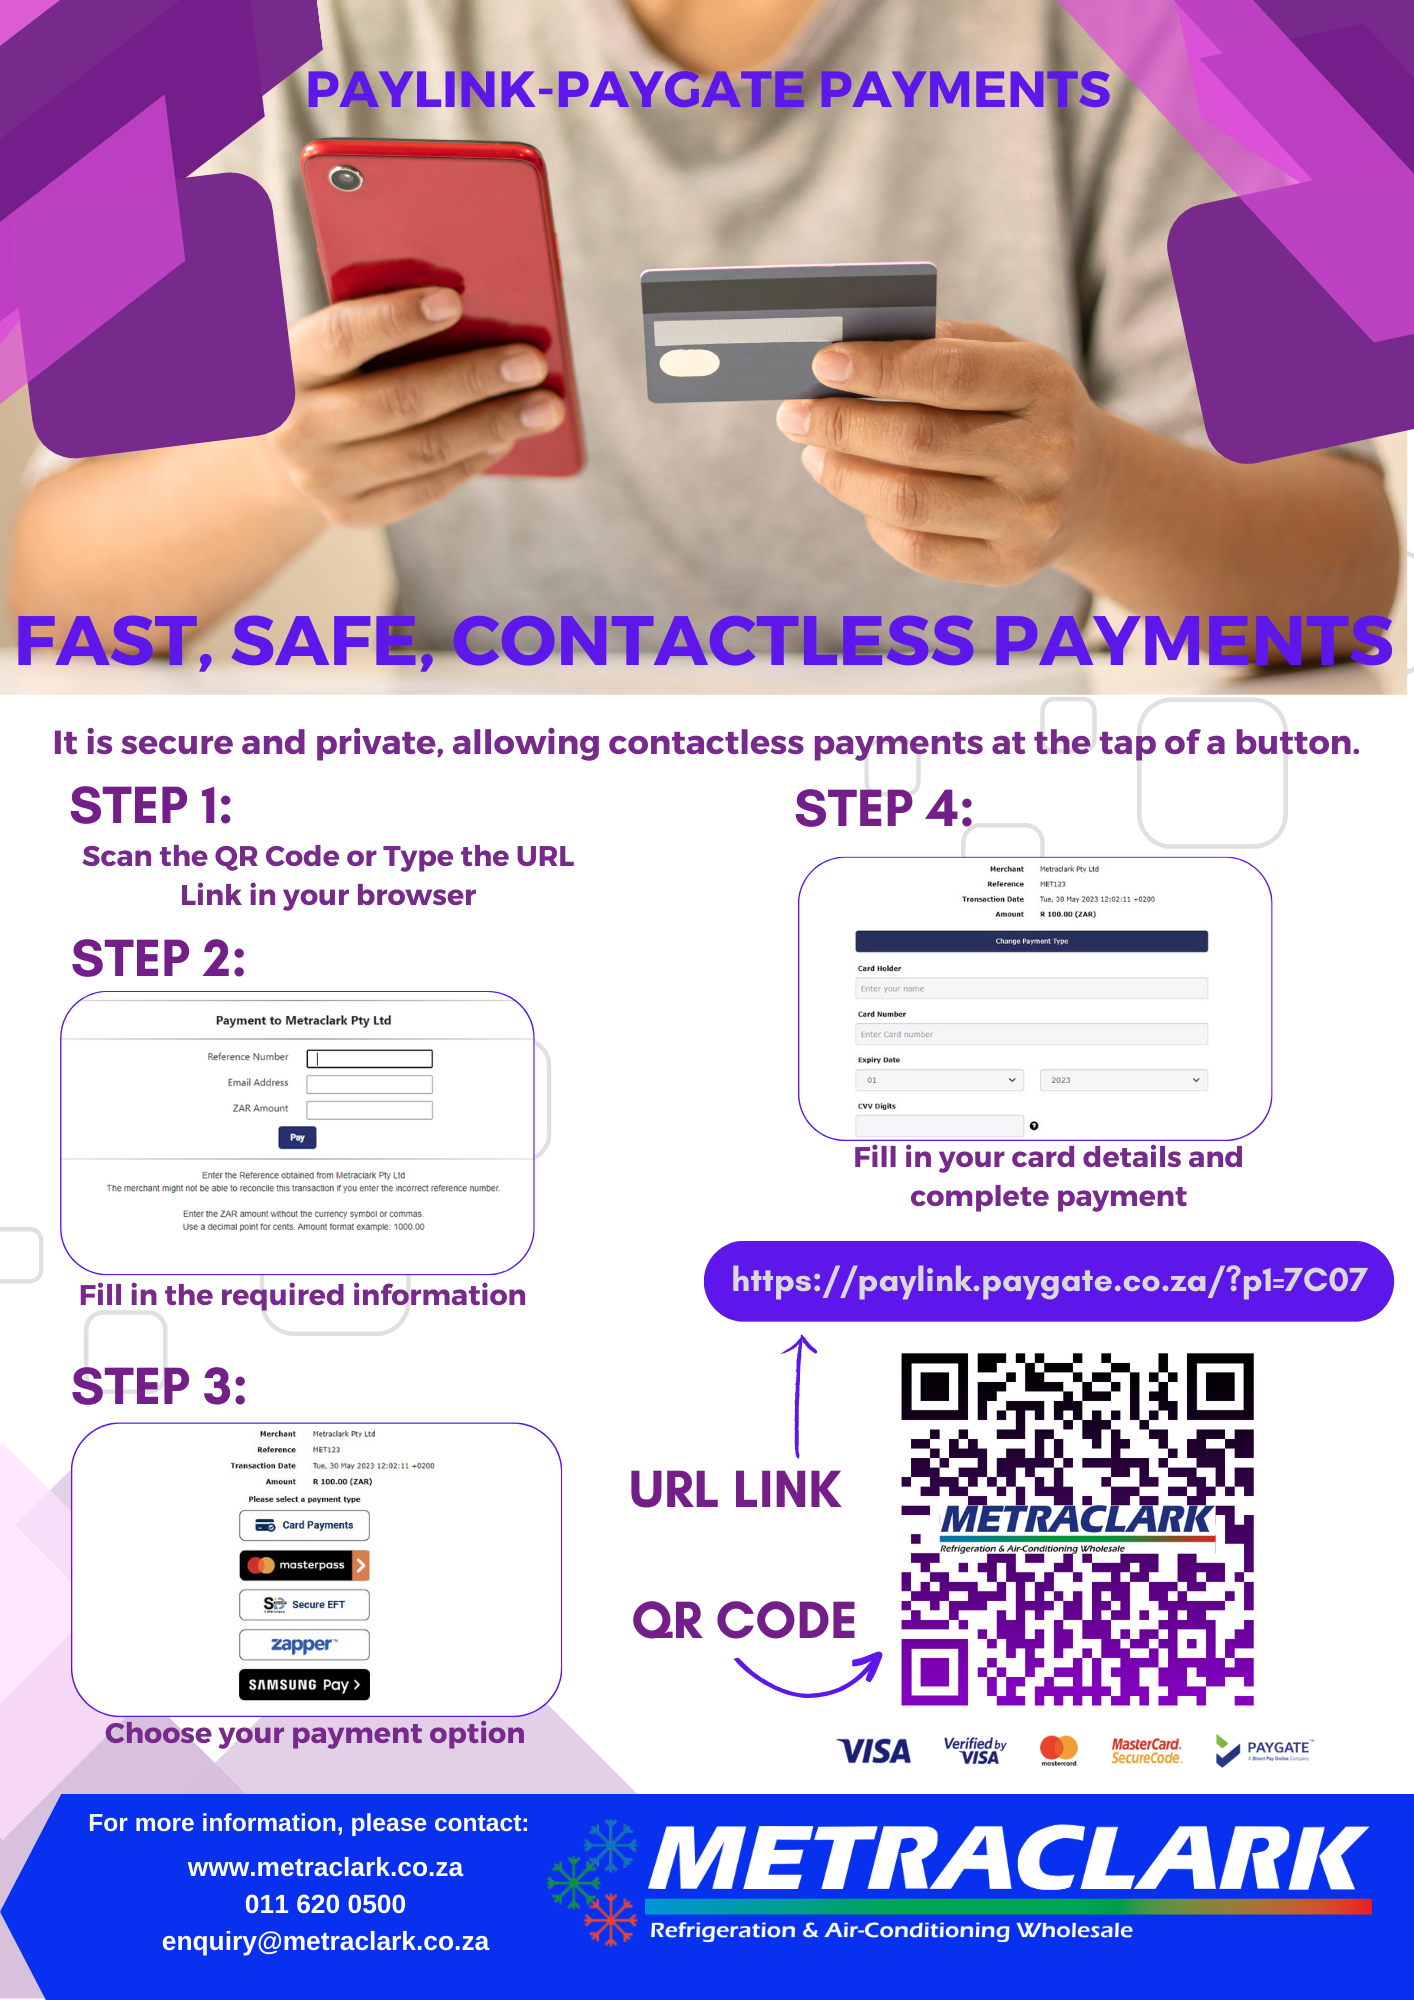 Paylink/Paygate Payments-Fast, Safe, Contactless Payments for Your Convenience at Metraclark!